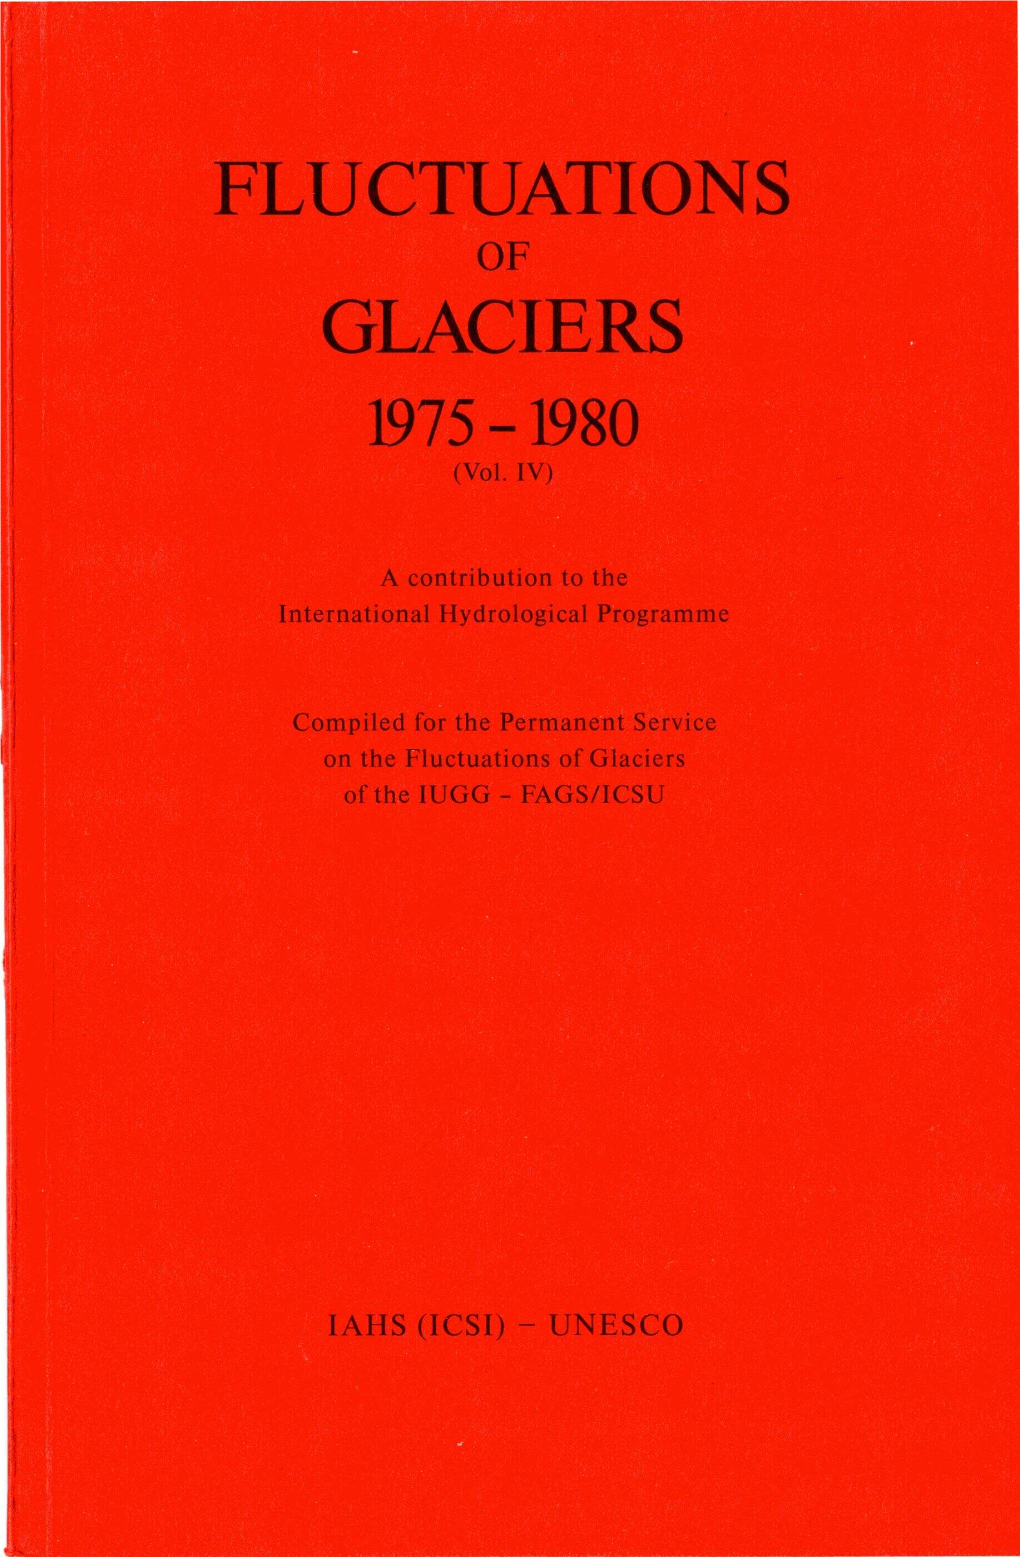 FLUCTUATIONS of GLACIERS 1975-1980 with Addenda from Earlier Years This Volume Continues the Earlier Works Published Under the Titles